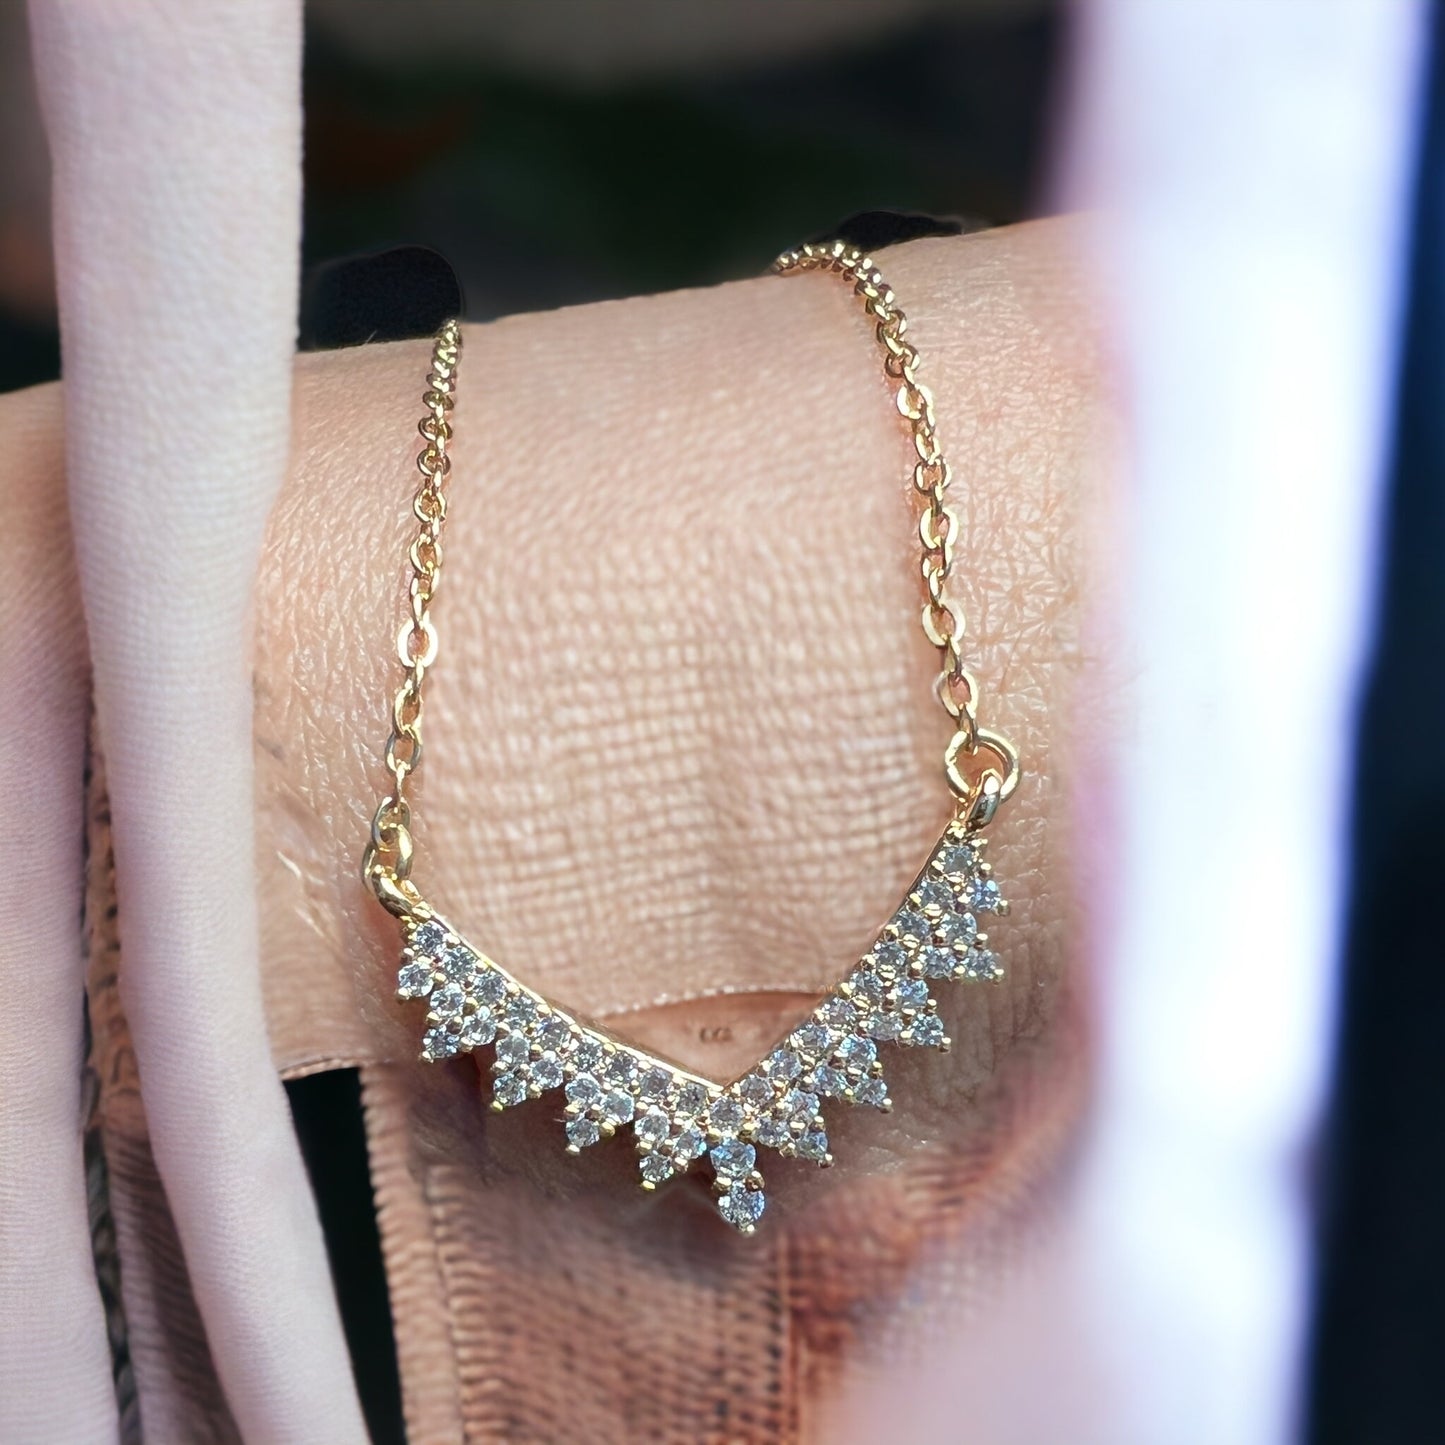 Dainty Elegance: Cubic Zircons Necklaces in Gold and Silver – A Subtle Touch of Sparkle for Effortless Style